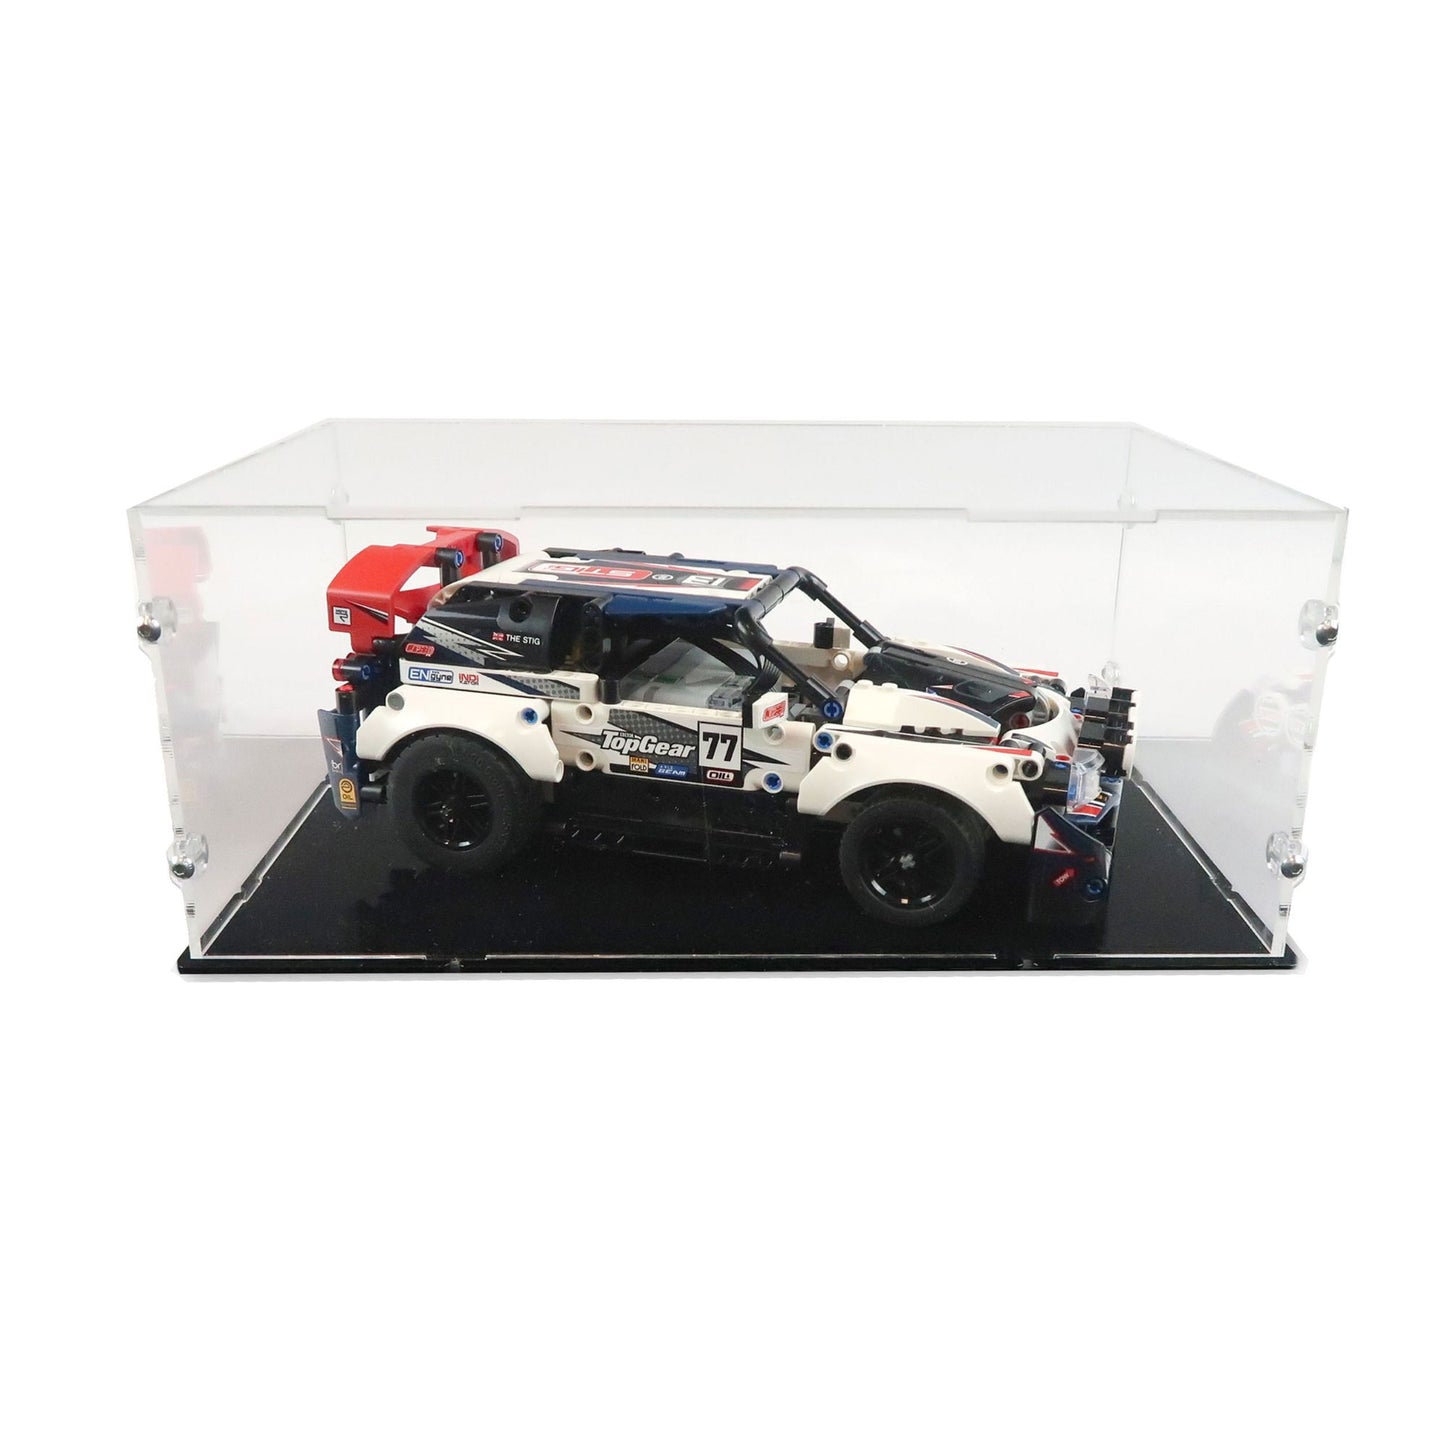 42109 App-Controlled Top Gear Rally Car Display Case